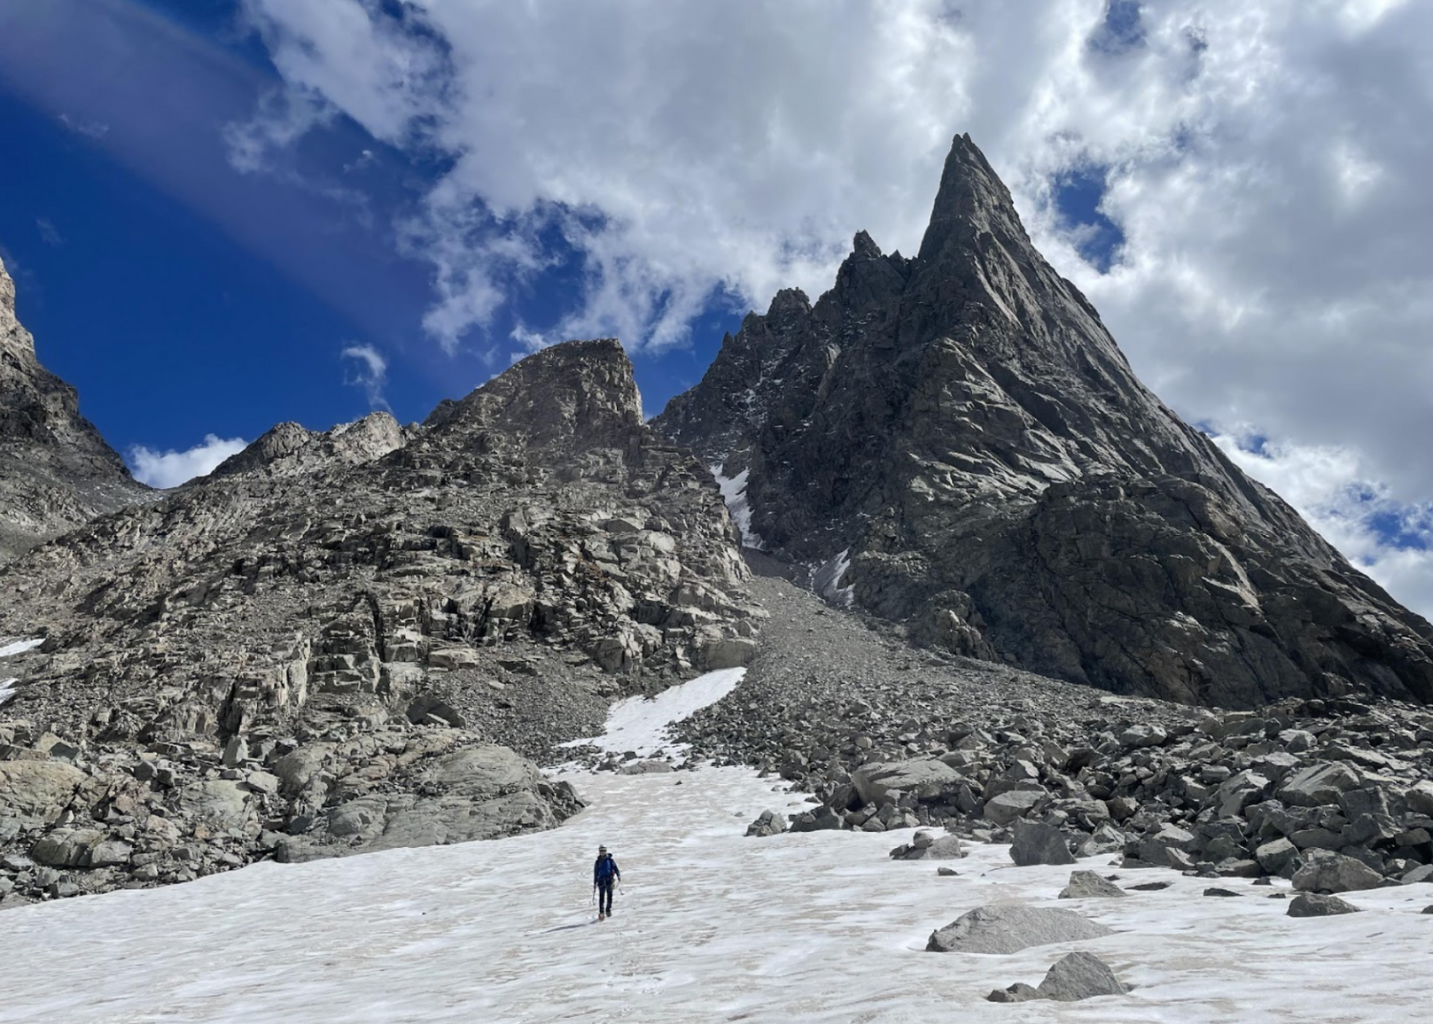 Trip report: Backpacking & ice climbing in the Wind River Range